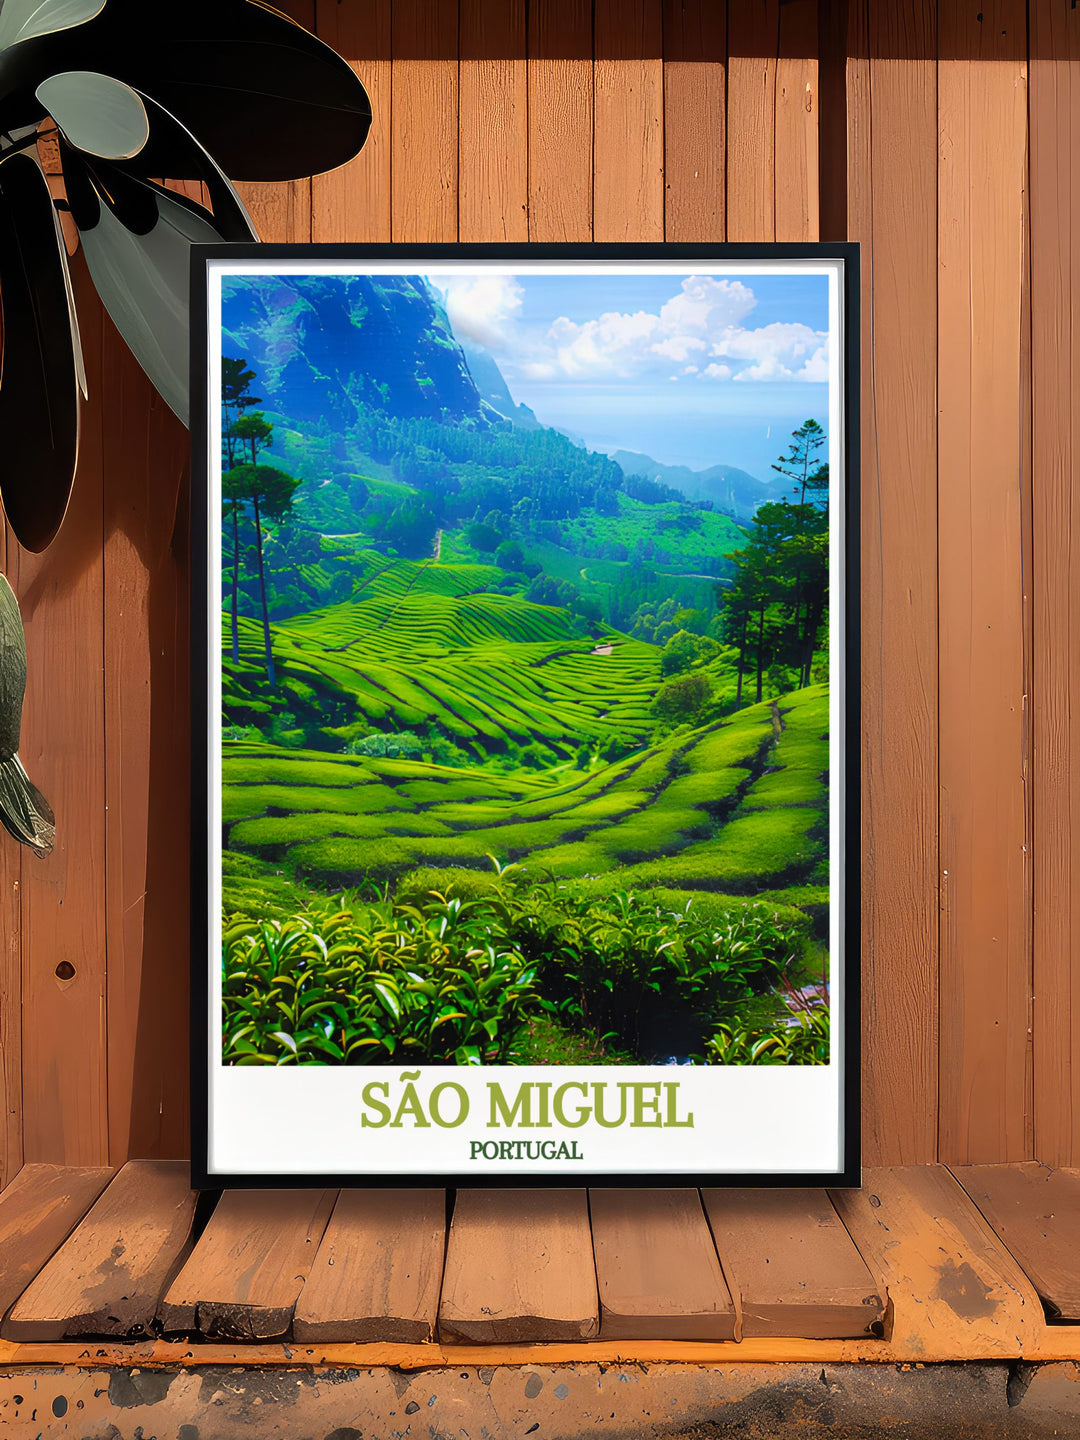 This detailed art print of São Miguel captures the serene landscapes of the tea plantations, offering a glimpse into the islands rich agricultural history and natural beauty.